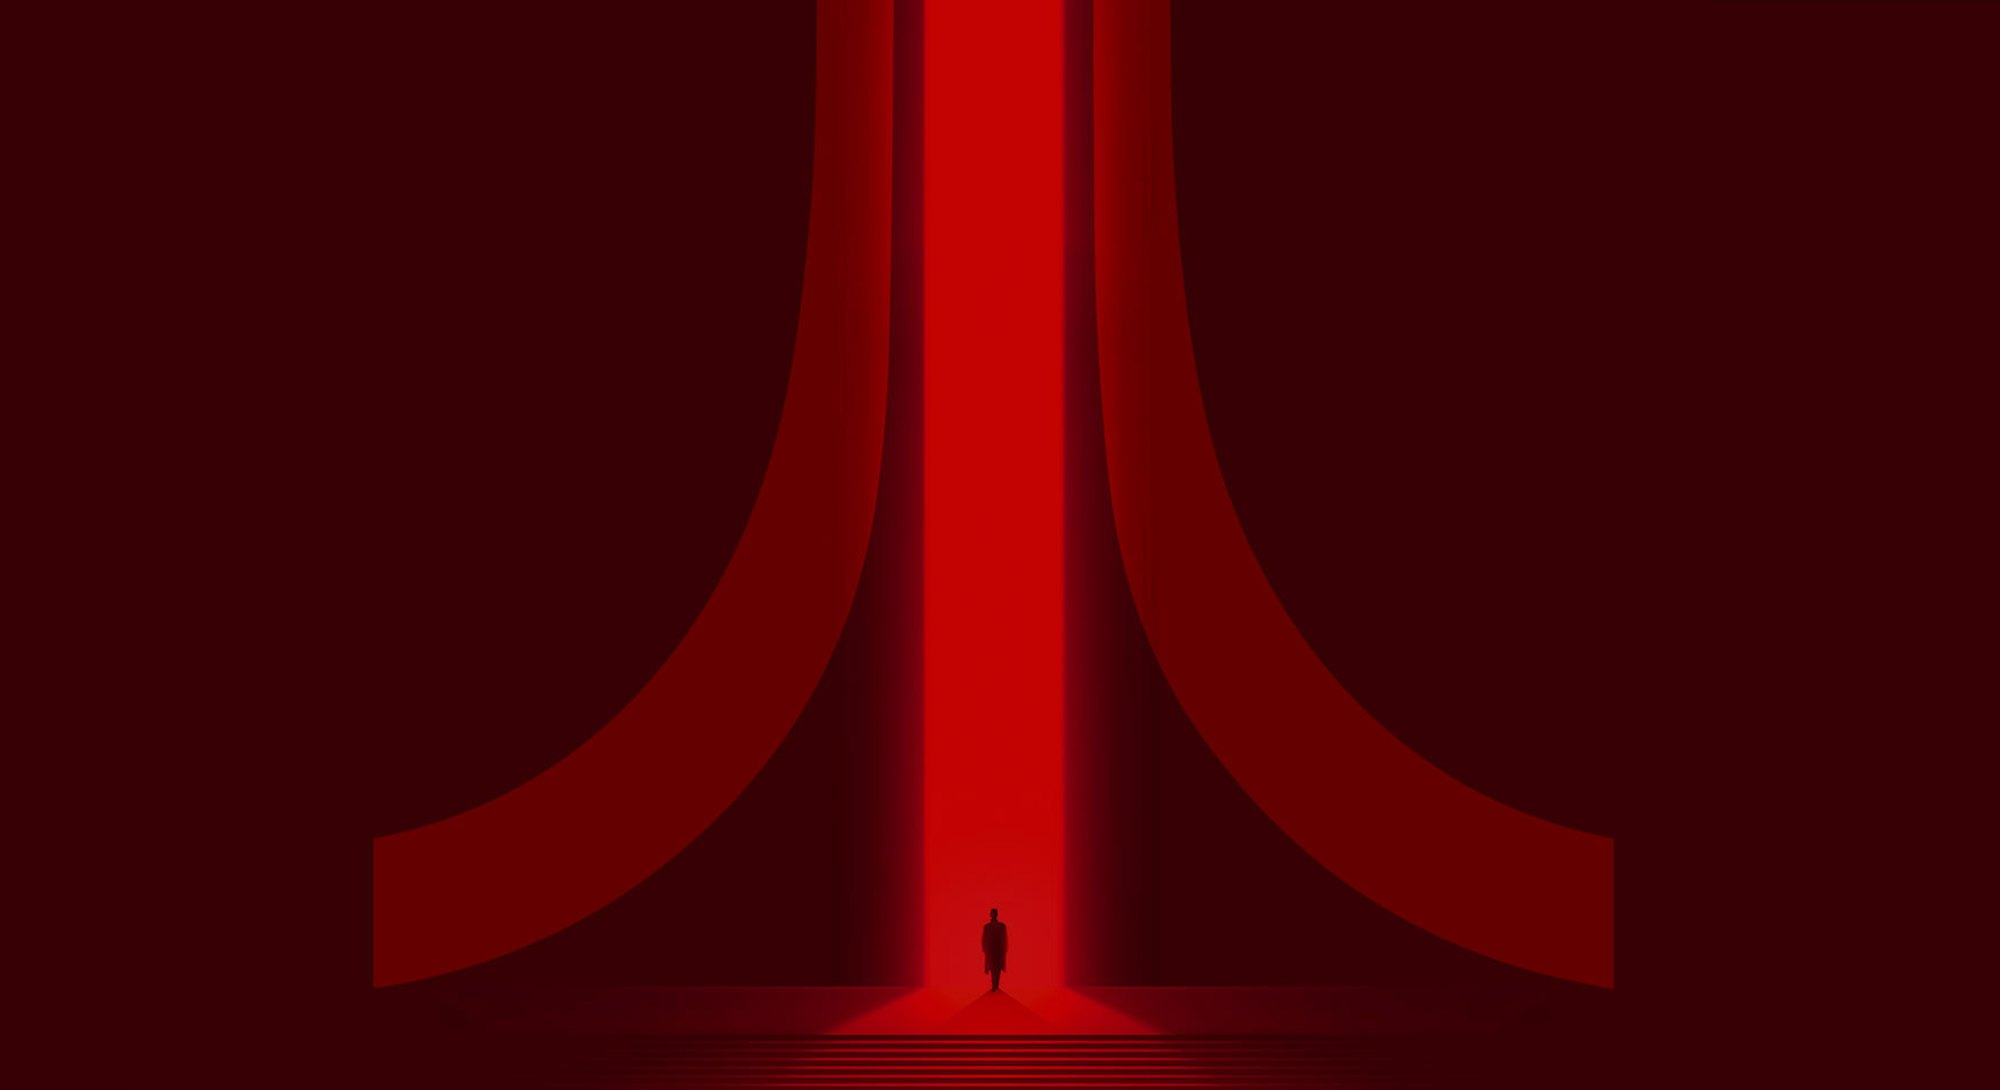 A person is walking into a deep red and black Atari logo symbol.